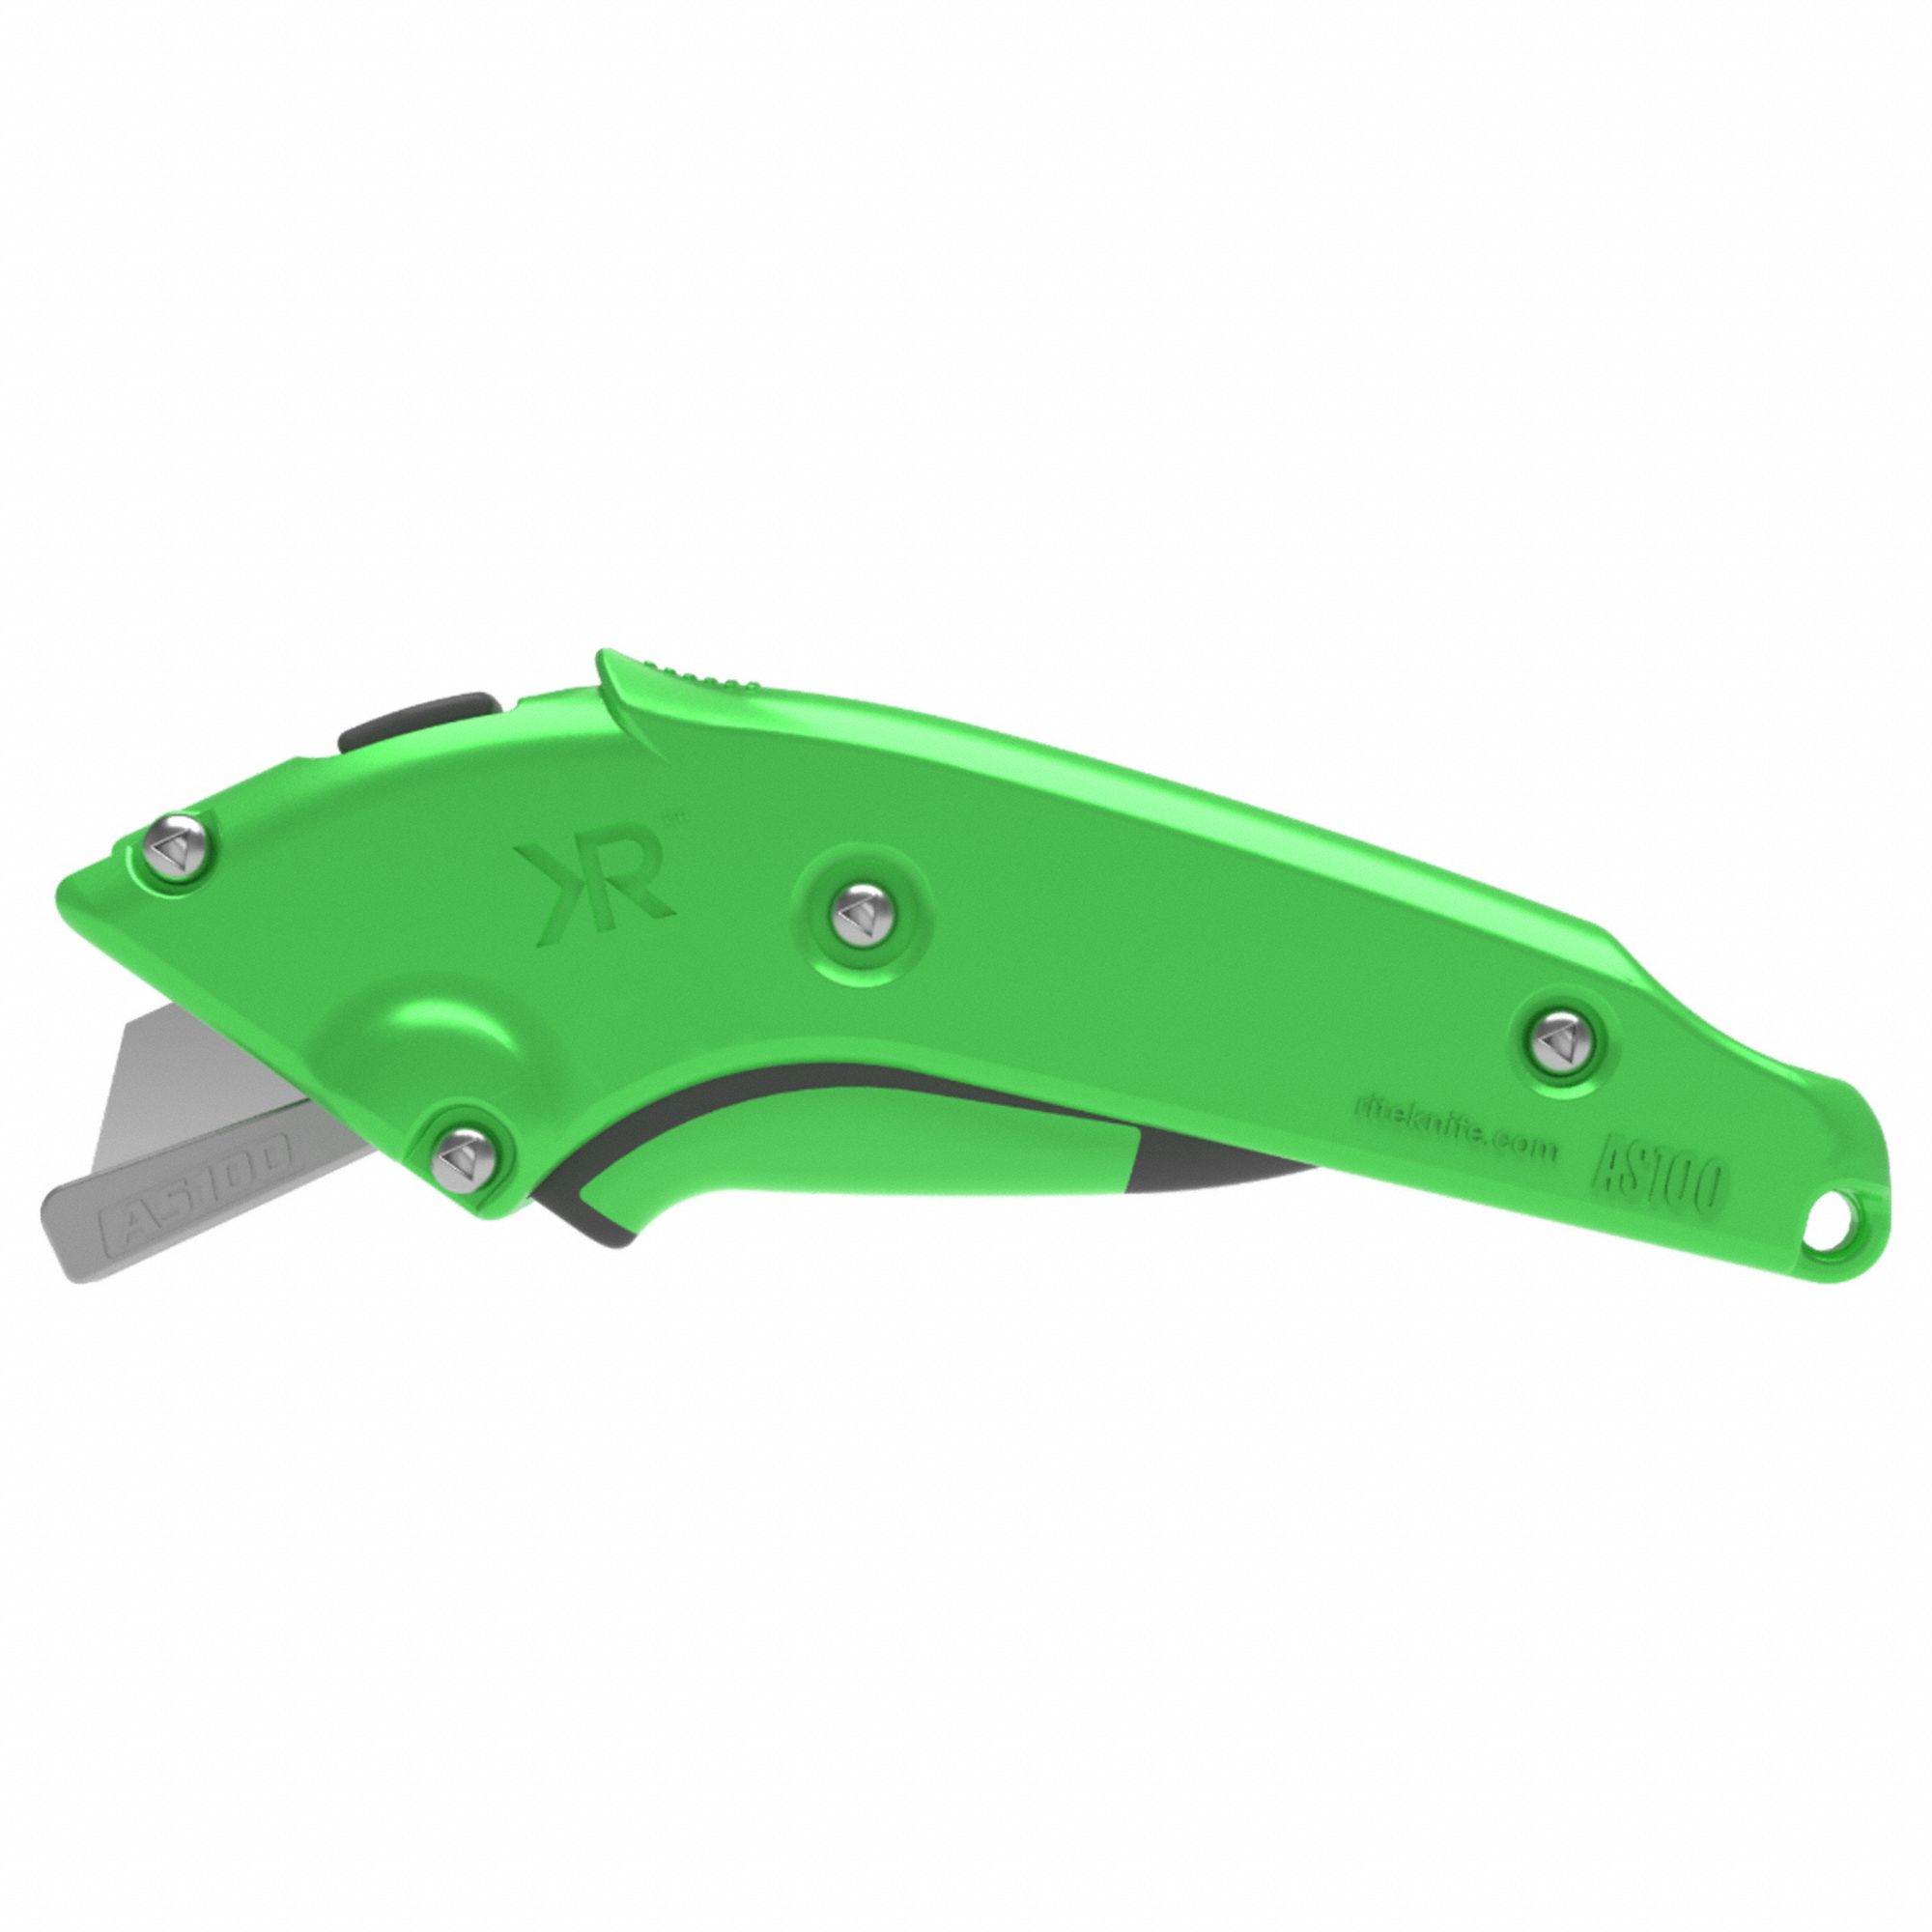 Utility Knife: 7 in Overall Lg, Textured, 2 1/2 in Overall Wd, Aluminum, Green, Button